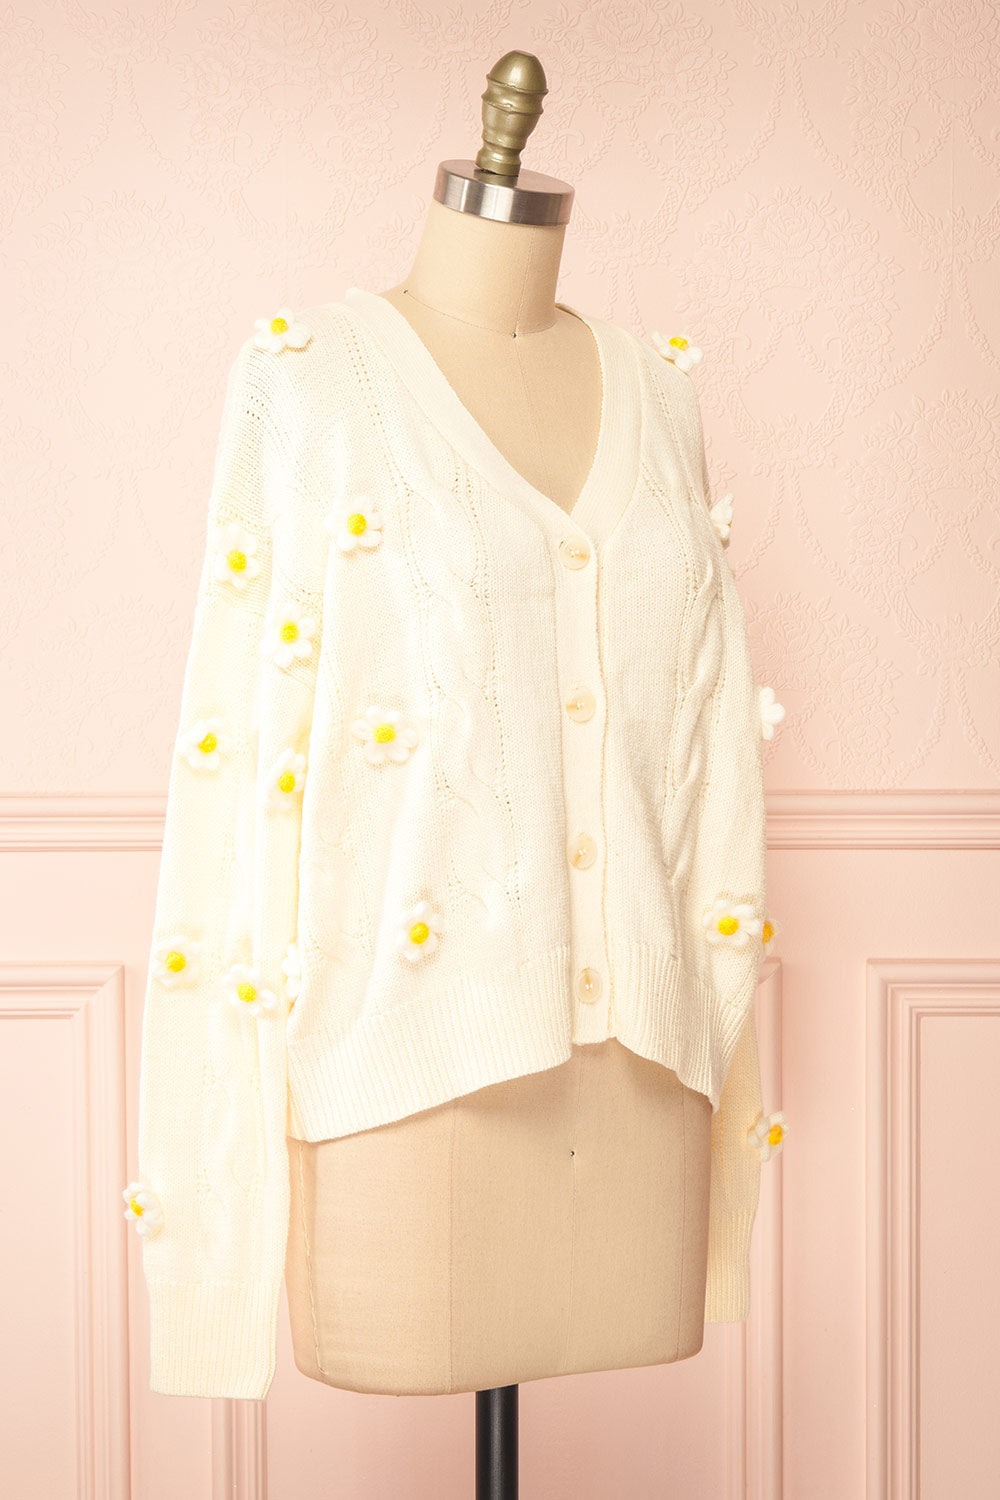 Sweetie Cream Cardigan w/ 4D Daisies | Boutique 1861 sid eview